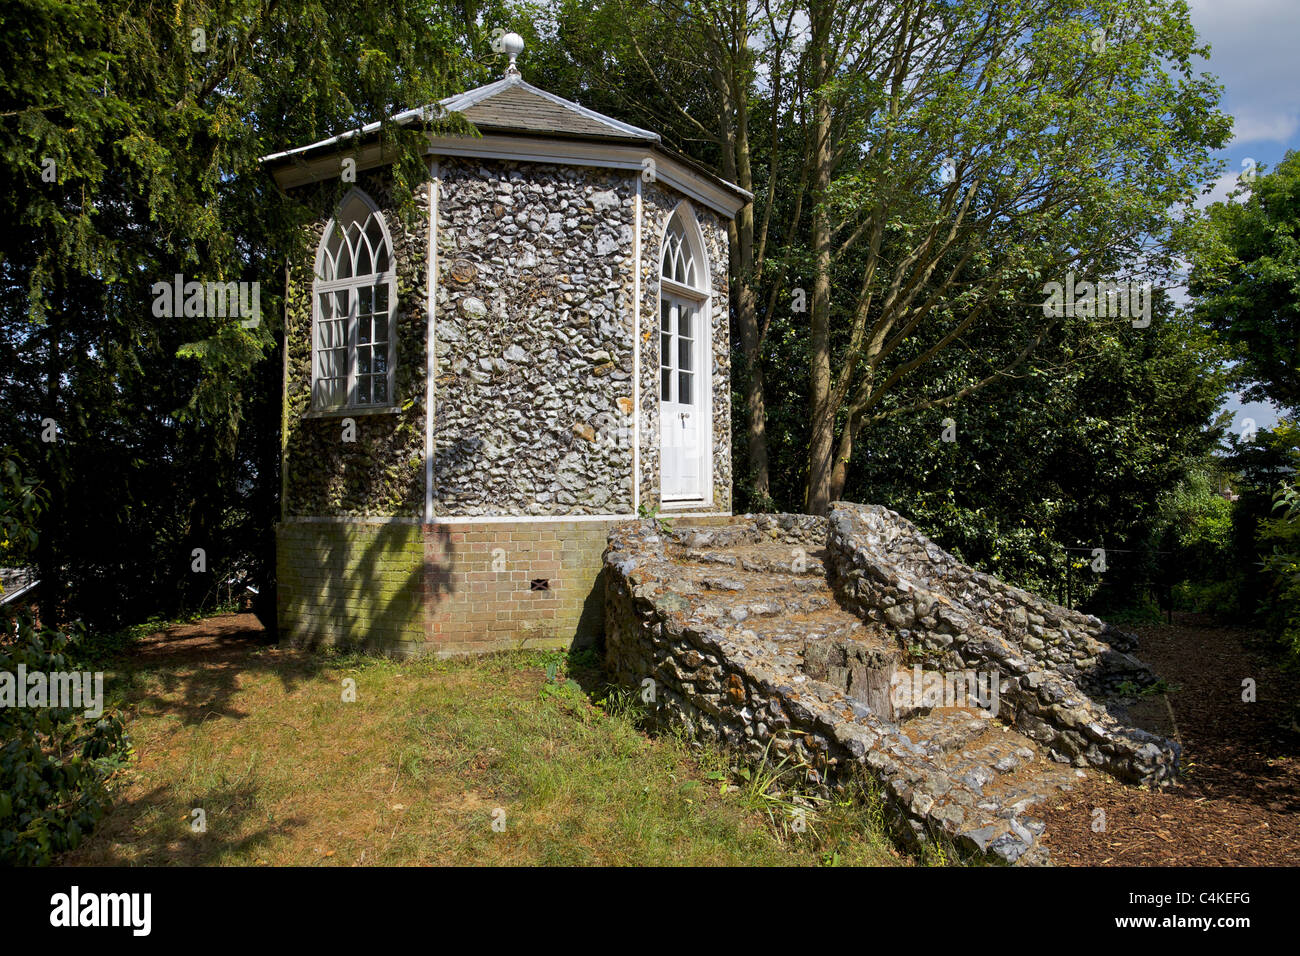 The Summer house at Scott's Grotto, Ware, Hertfordshire, England Stock Photo